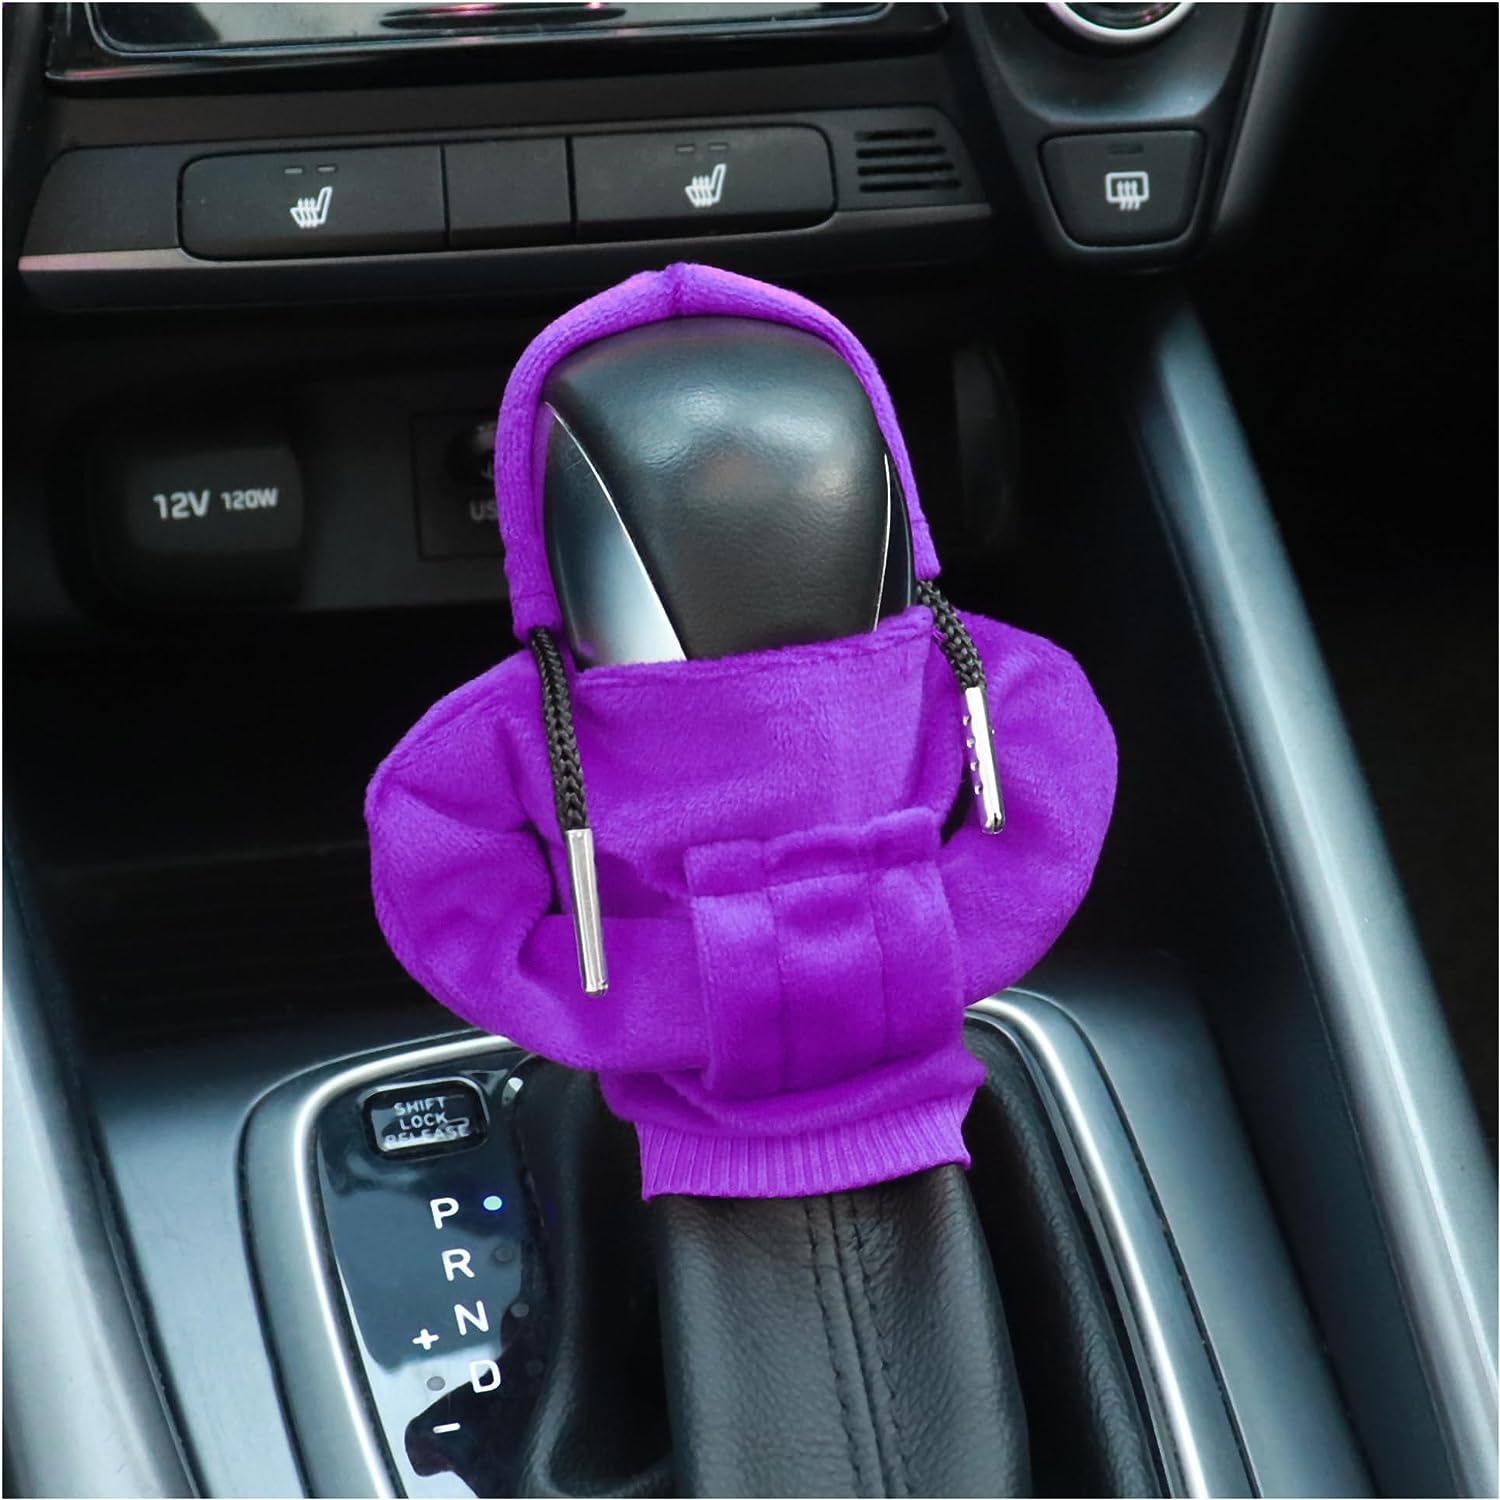  Gear Shift Hoodie, Universal Car Gear Shift Knob Cover, Funny  Sweater Shifter Hoodie, 4.7 Inch Gear Stick Hoodie Protector  Decoration(Yellow) : Automotive